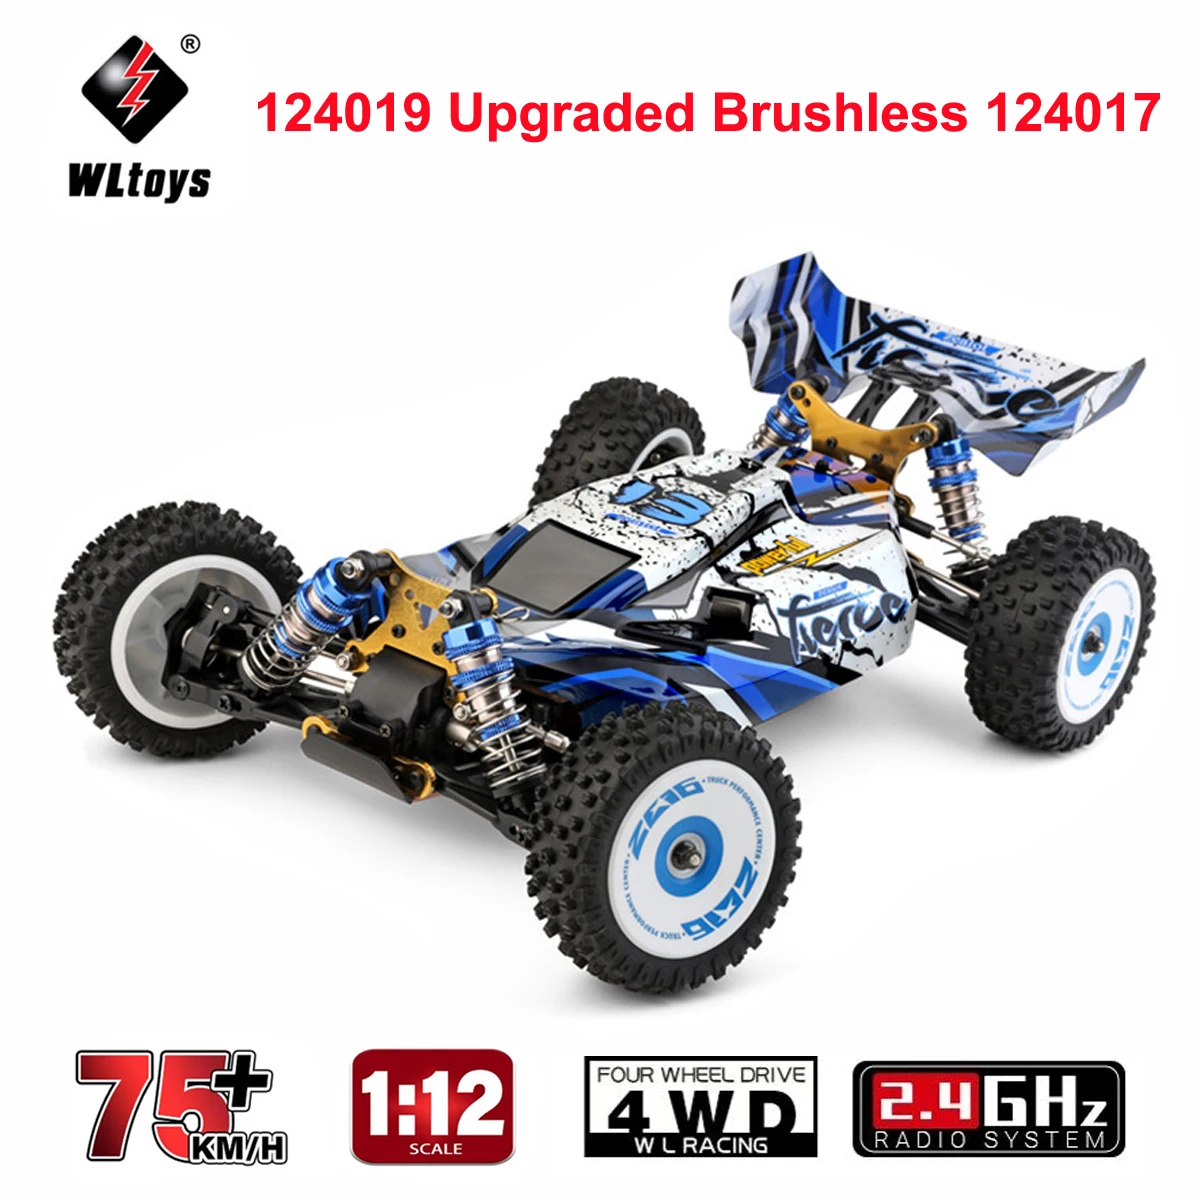 

Wltoys XK 124017 Upgraded Brushless 1/12 4WD 75km/h High Speed RC Car Vehicles Metal Chassis Models Racing Off Road Buggy Toys